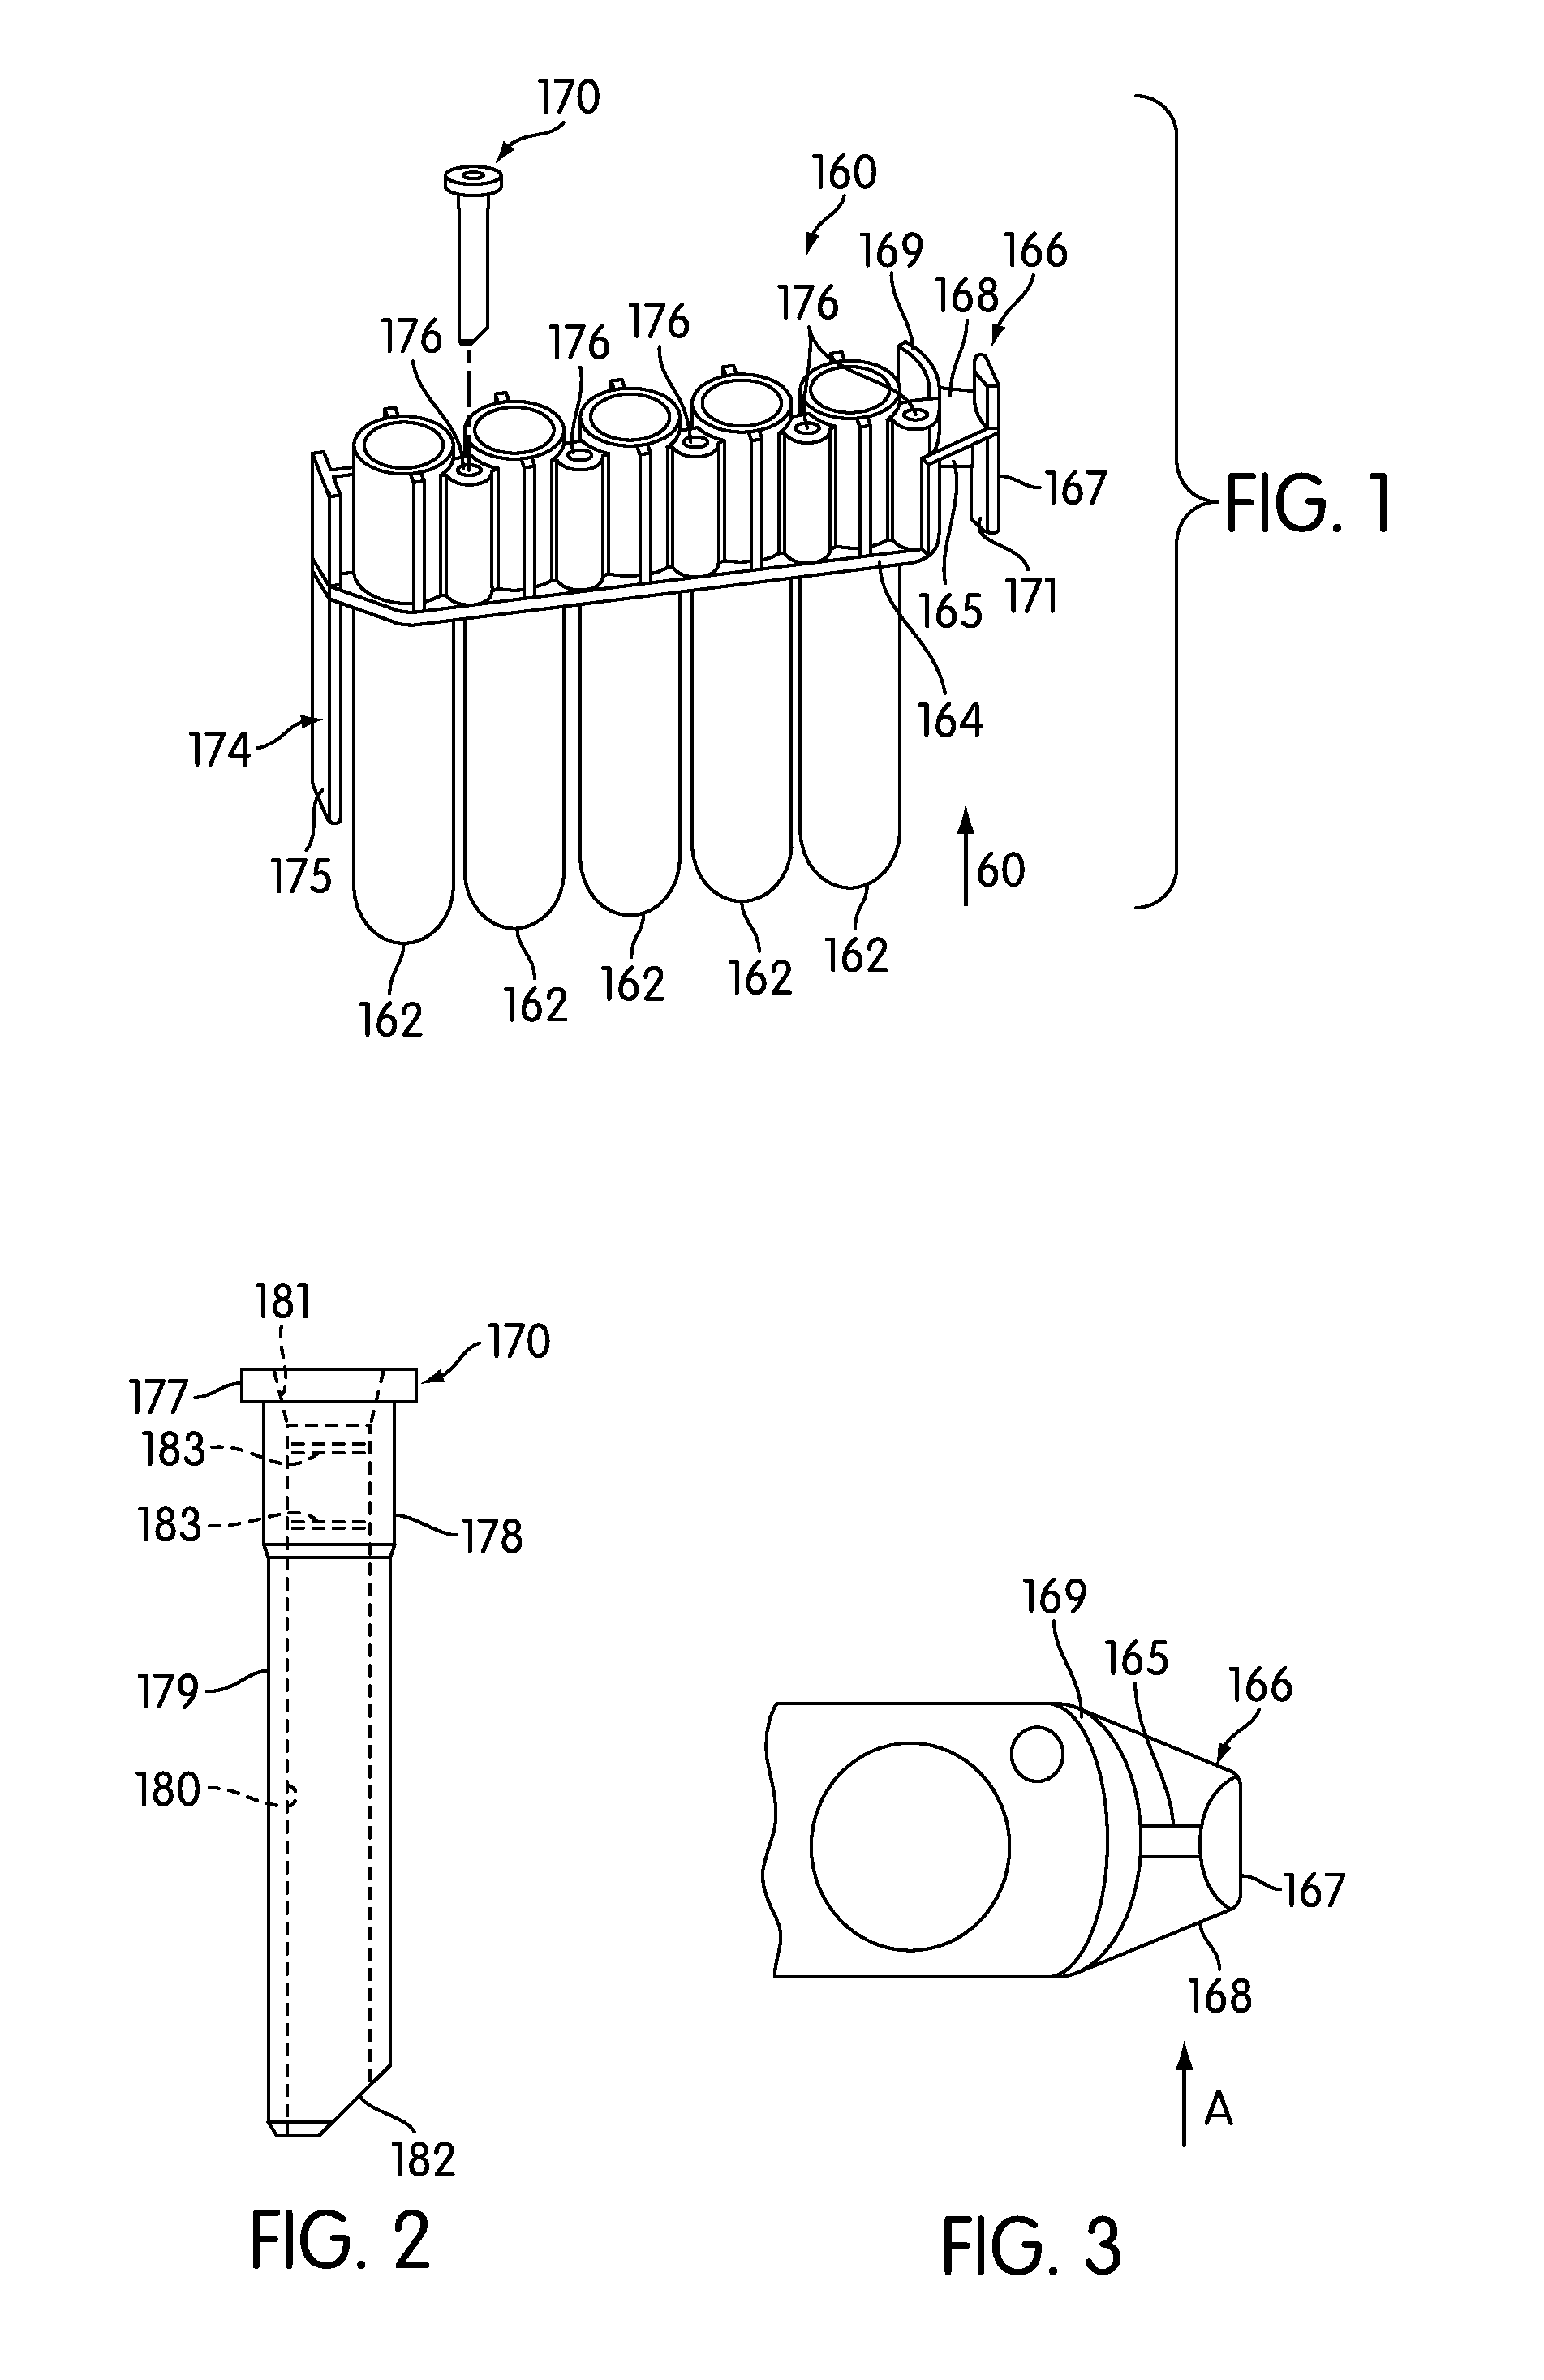 Method and Apparatus for Effecting Automated Movement of a Magnet in an Instrument for Performing a Magnetic Separation Procedure